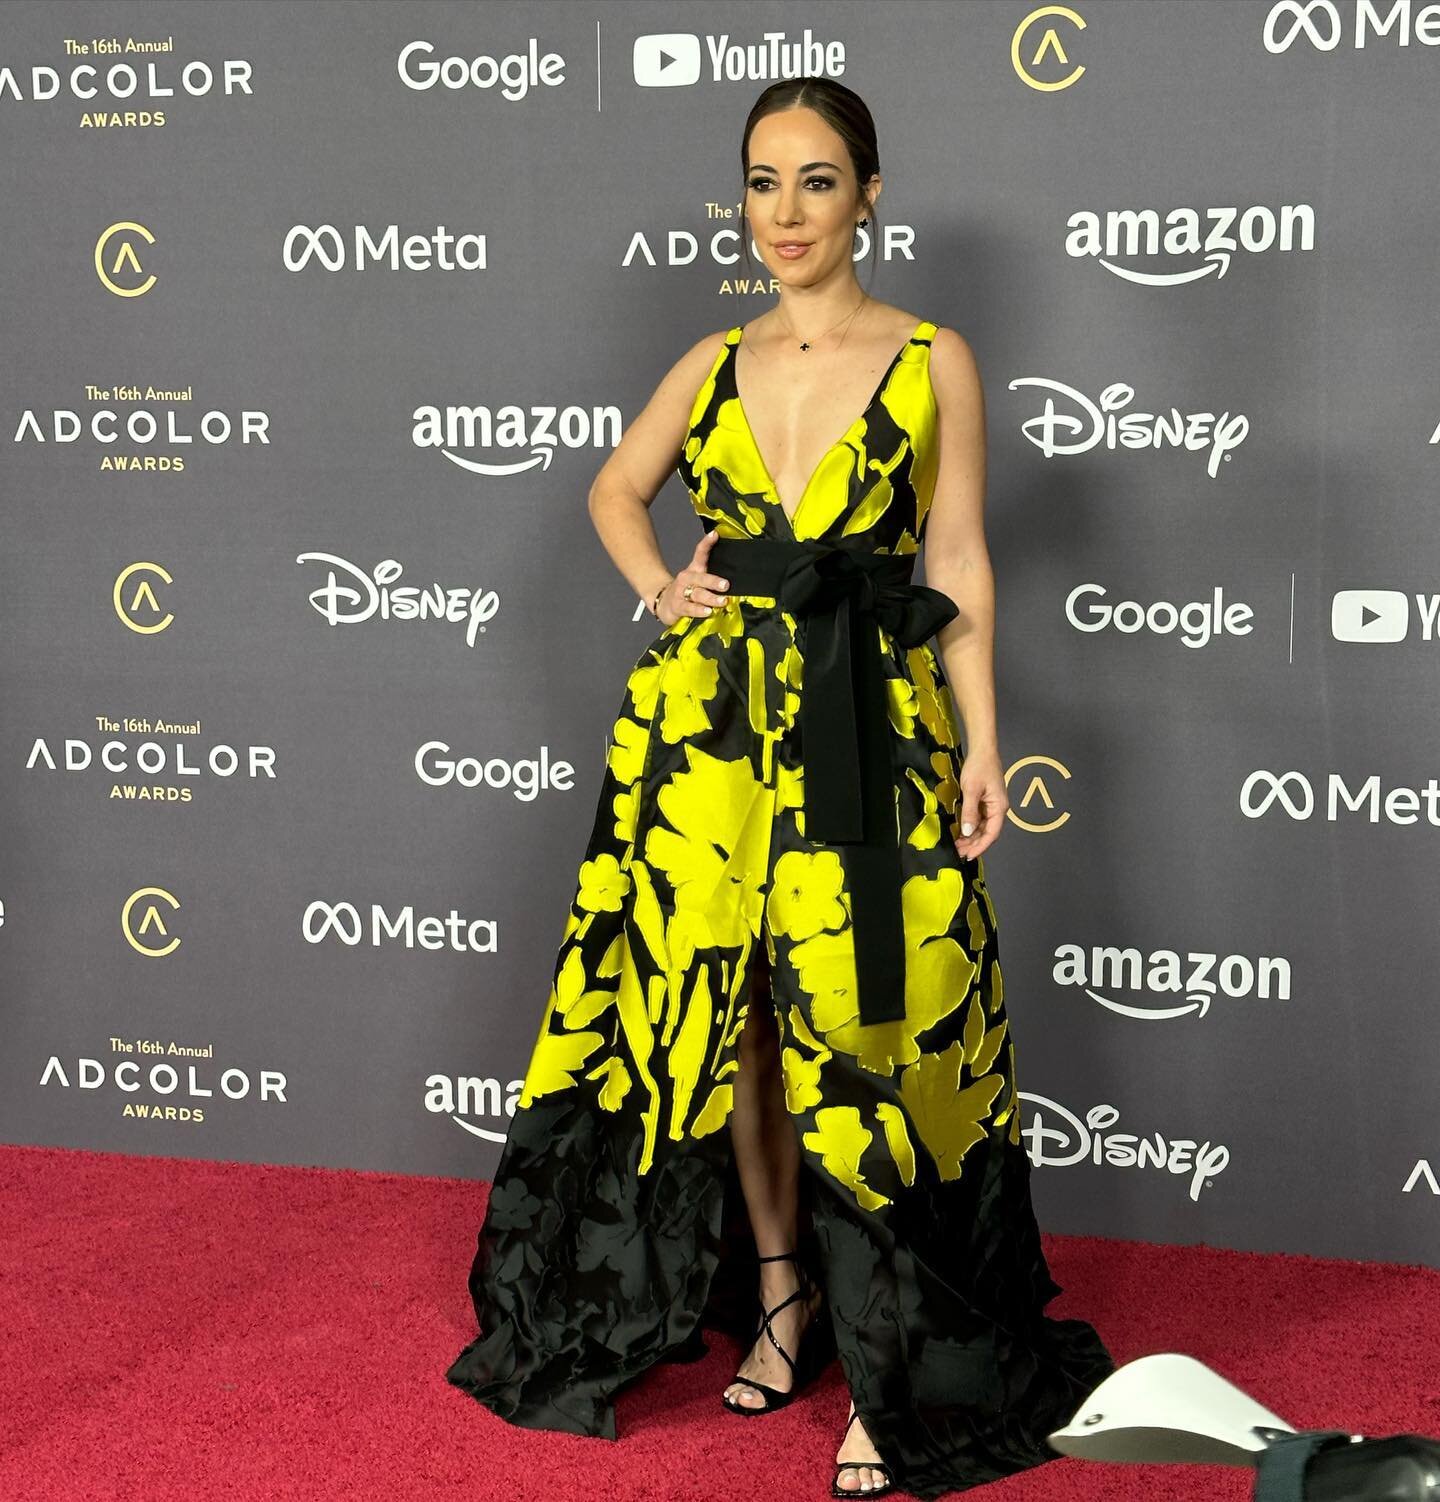 AdColor Awards 💛

Dress by @silviatcherassi 
Eternal inspiration @diverstar 

✊🏽 Thank you @adcolor for changing the narrative. Thank you to every single person who showed up, opened up, and discovered something in me I hadn&rsquo;t yet discovered 